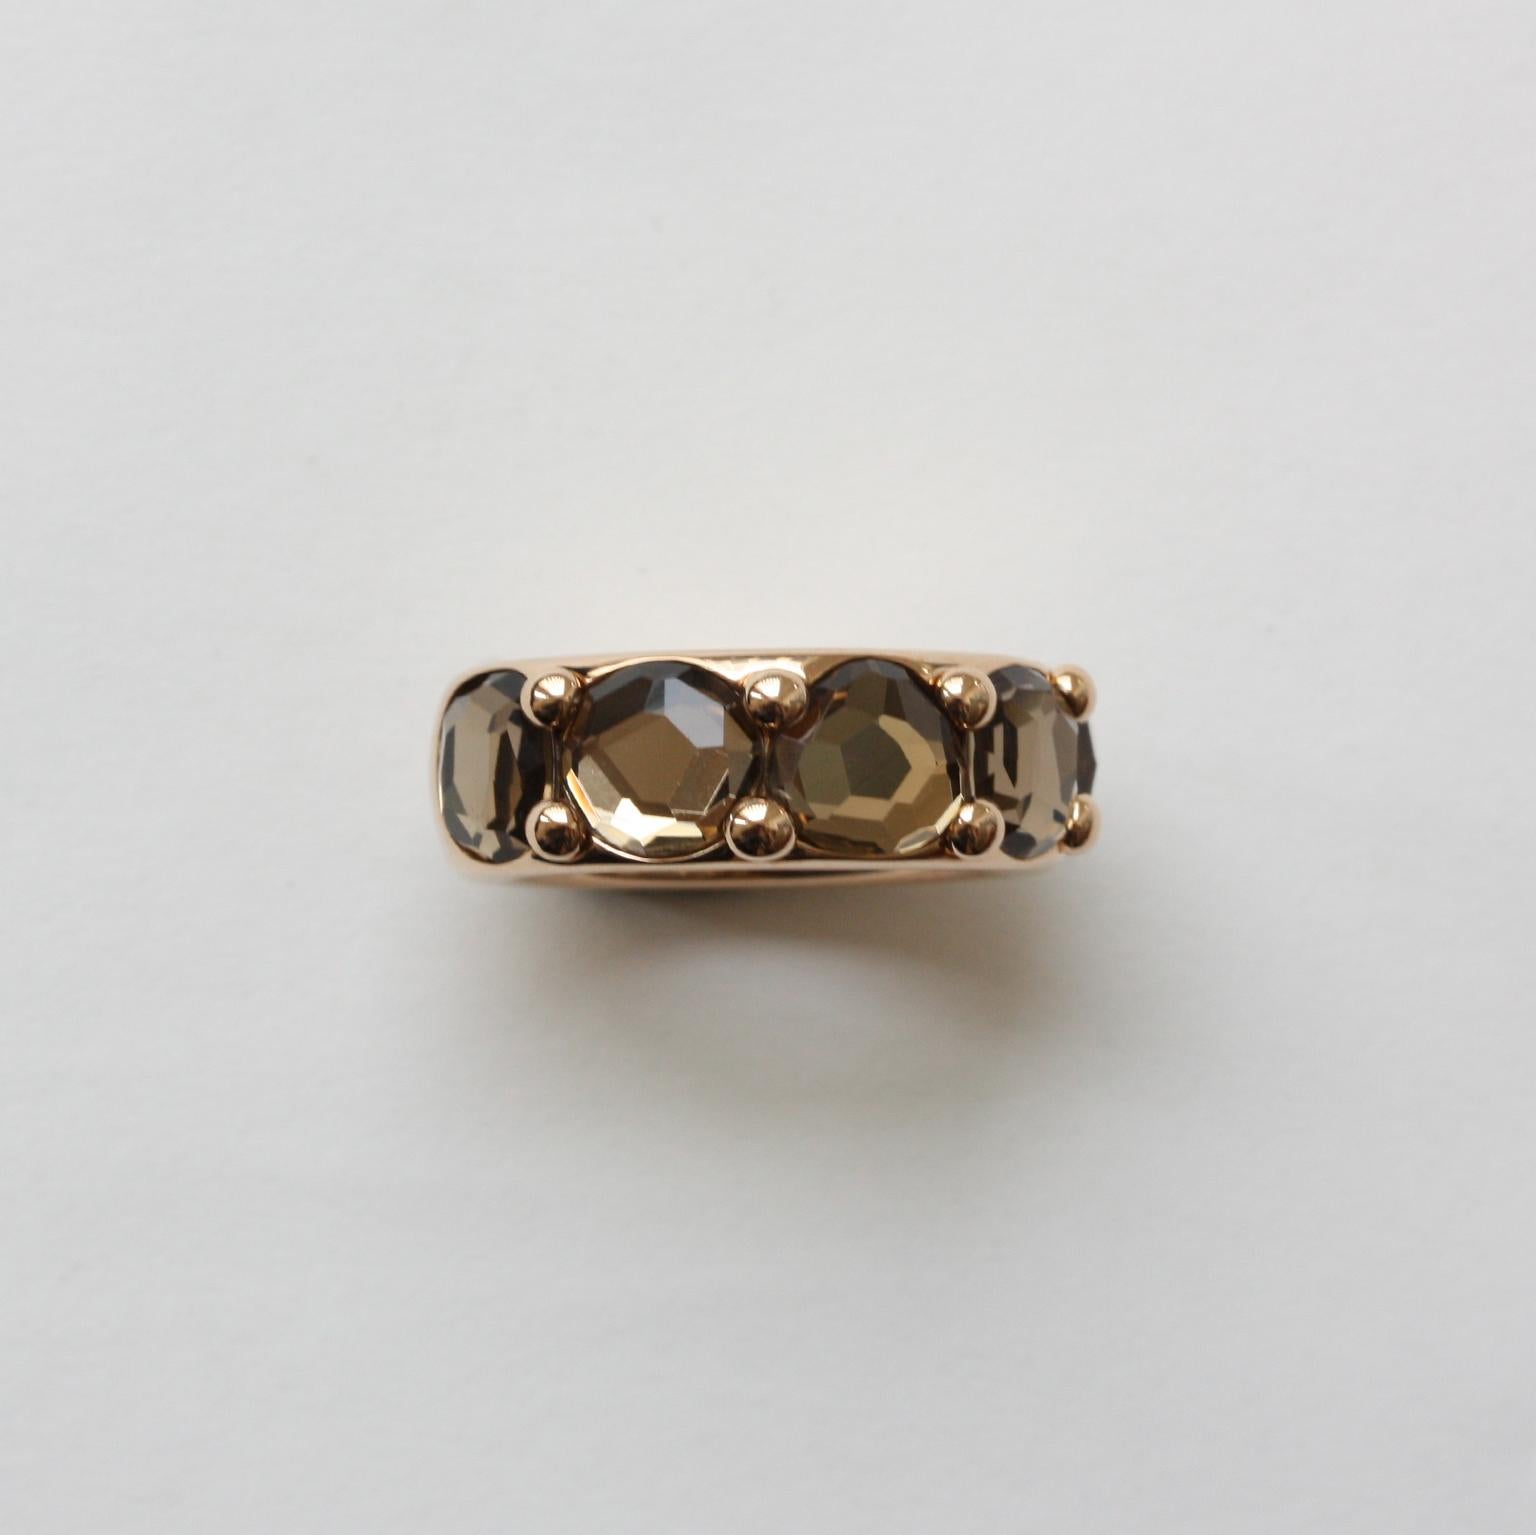 An 18 carat gold band ring set with 5 quartzes  signed: ring Pomellato, model Narciso, numbered: C900015305, size: 53.